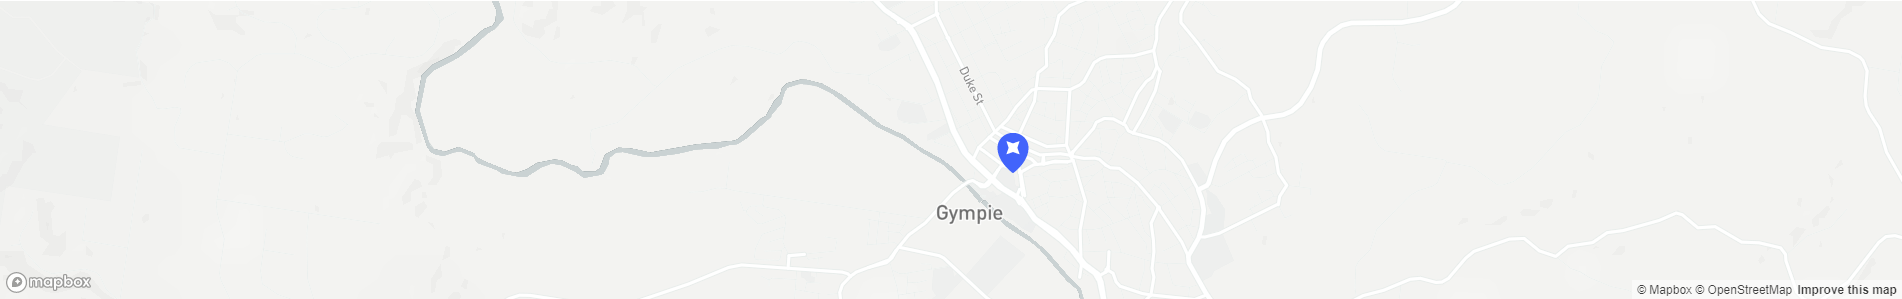 Gympie Map